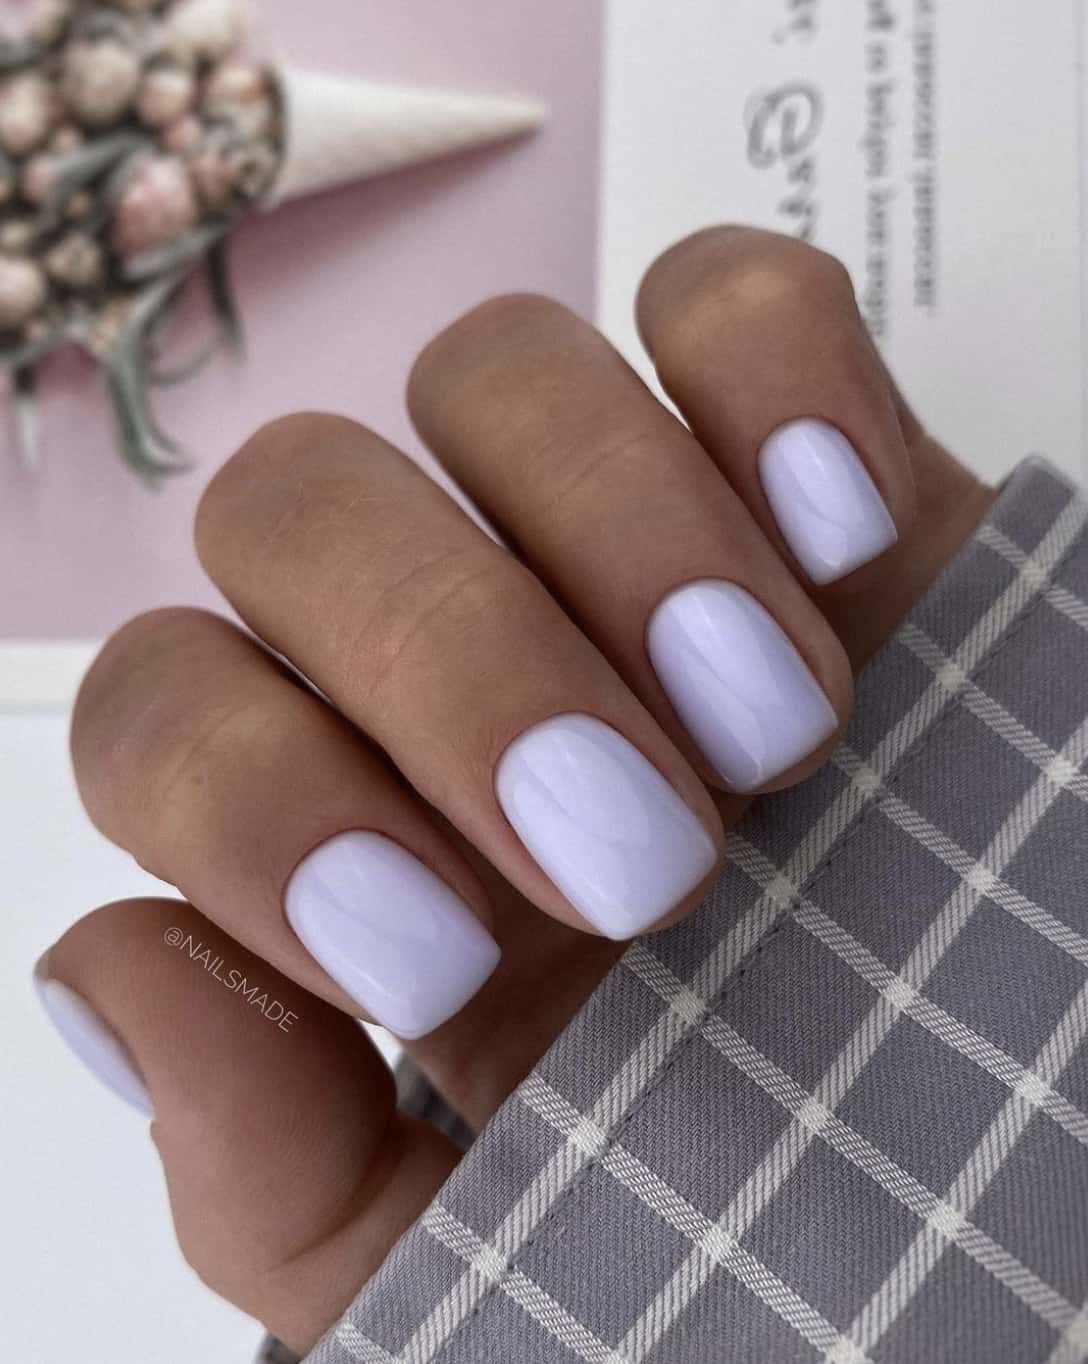 A hand with short square nails painted with pastel lilac nail polish